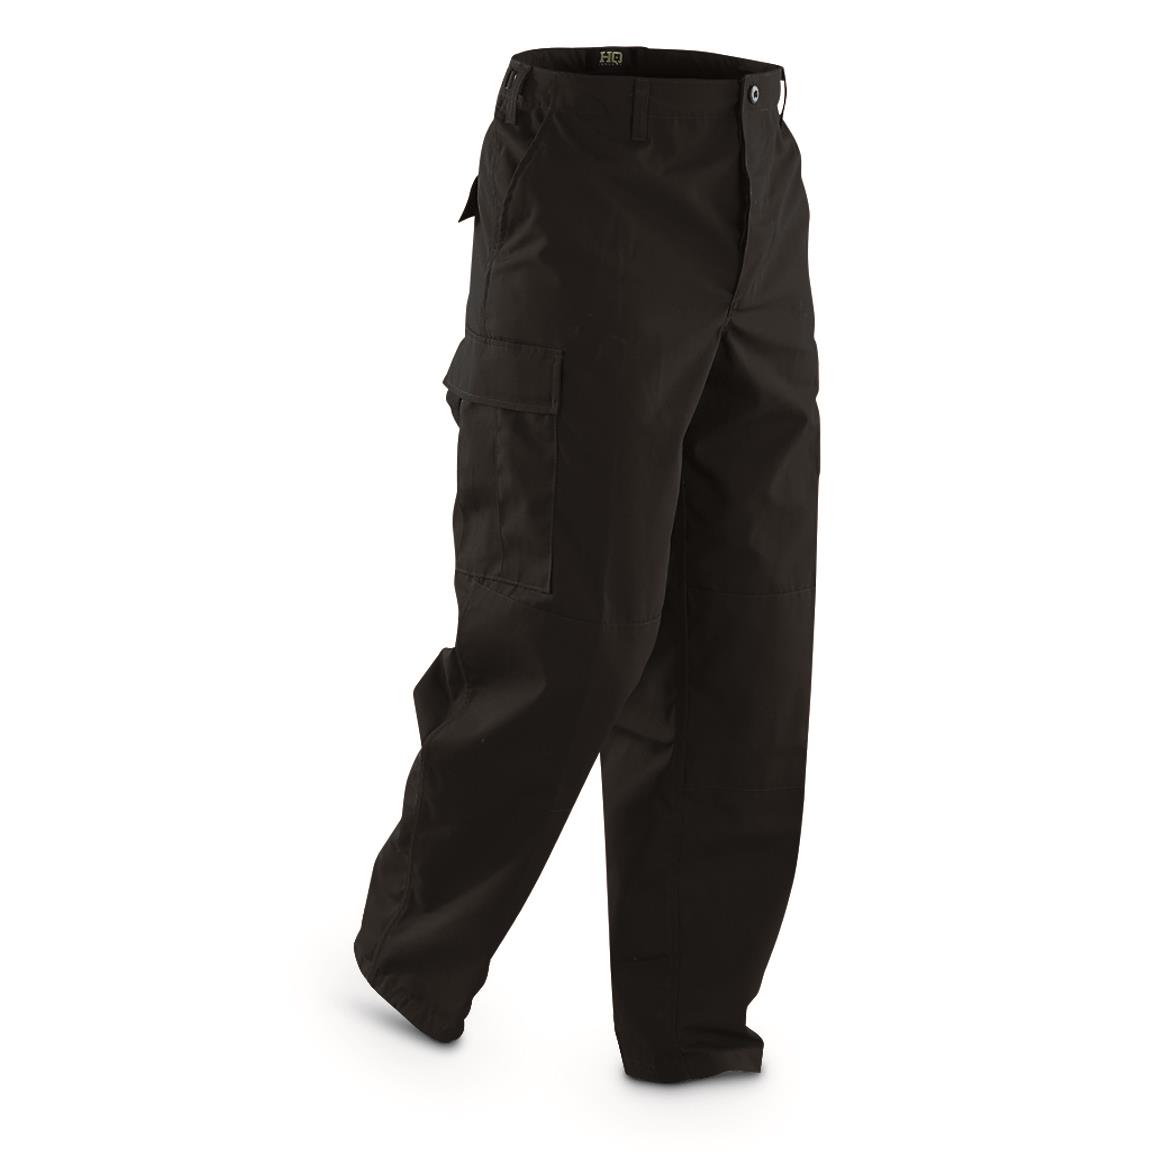 HQ ISSUE Military-Style Ripstop BDU Pants, Dark Navy - 648184, Tactical ...